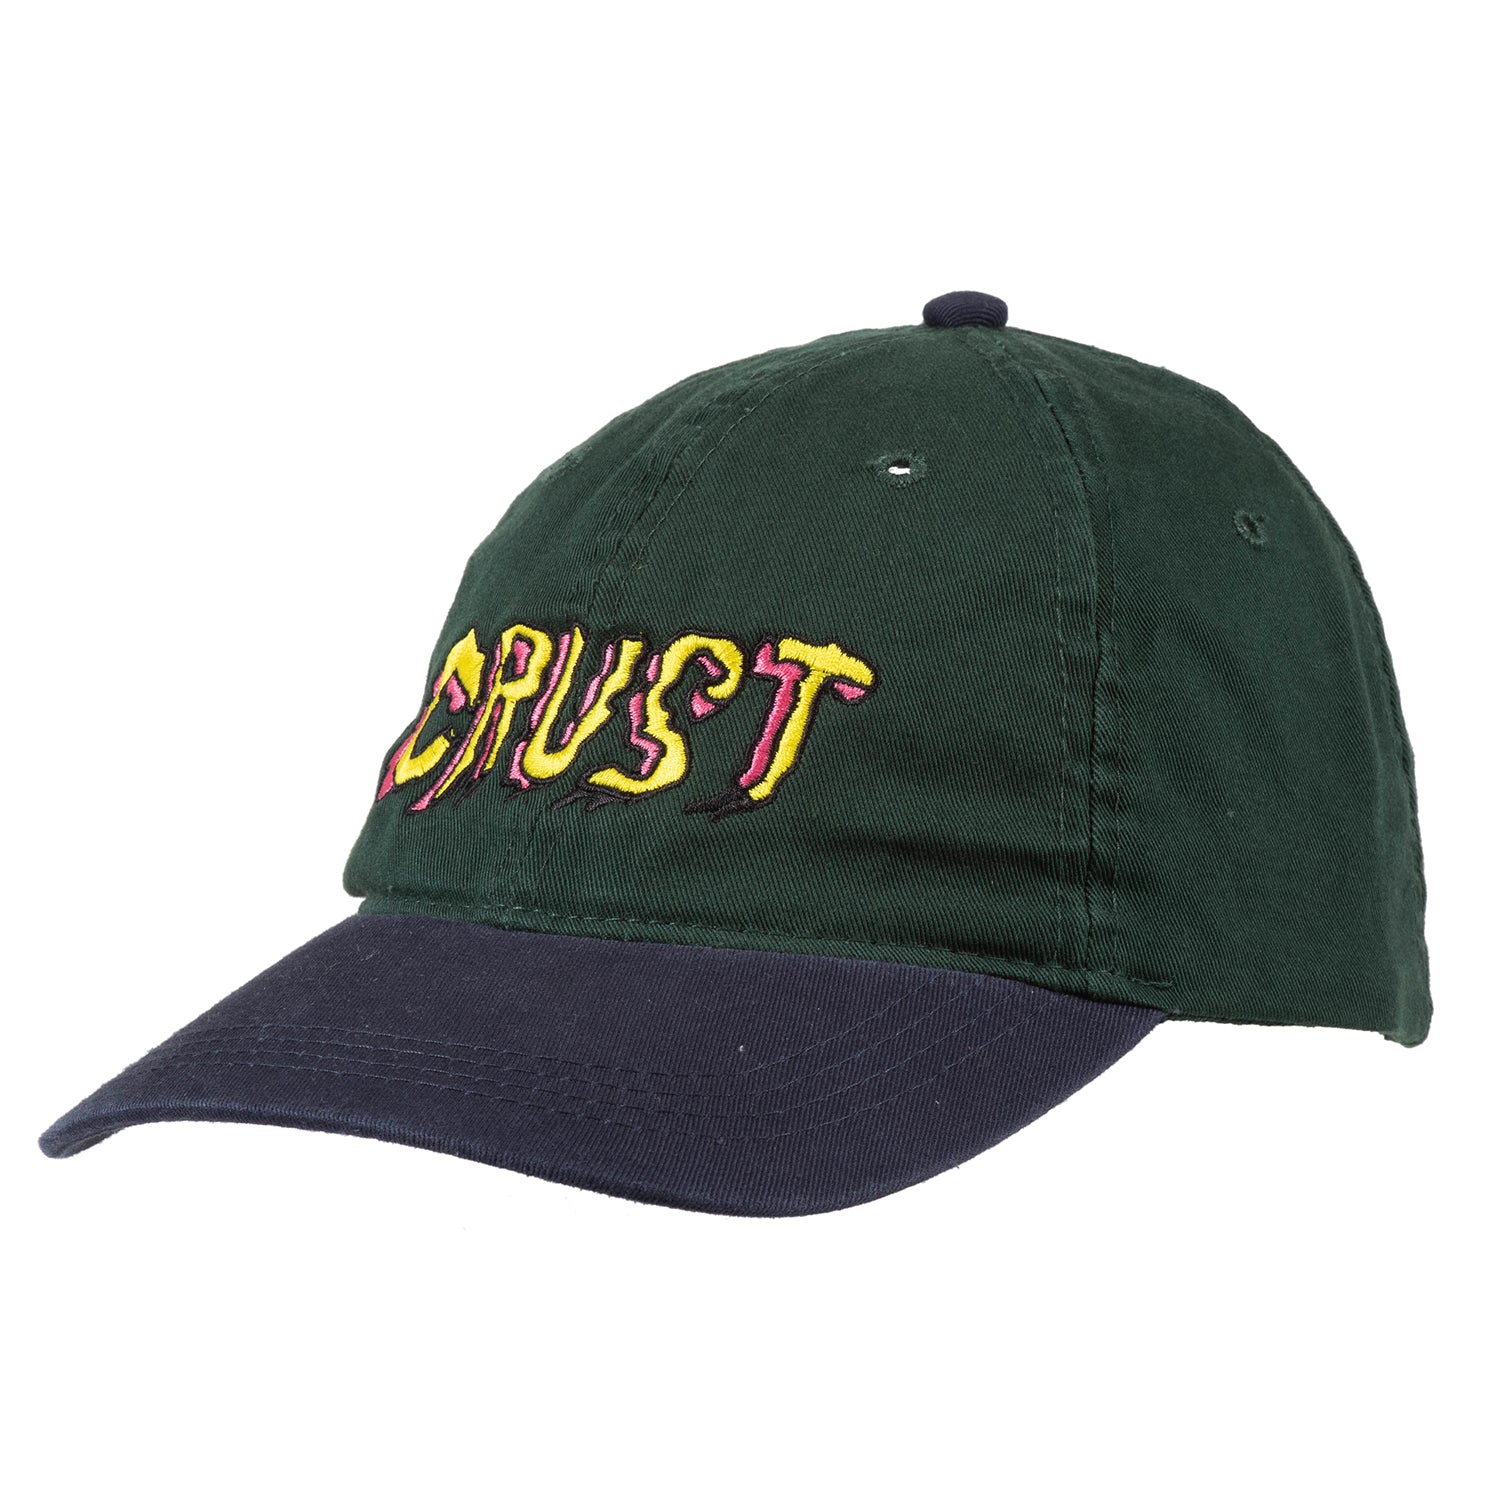 CRUST BIKES Embroidered Hats